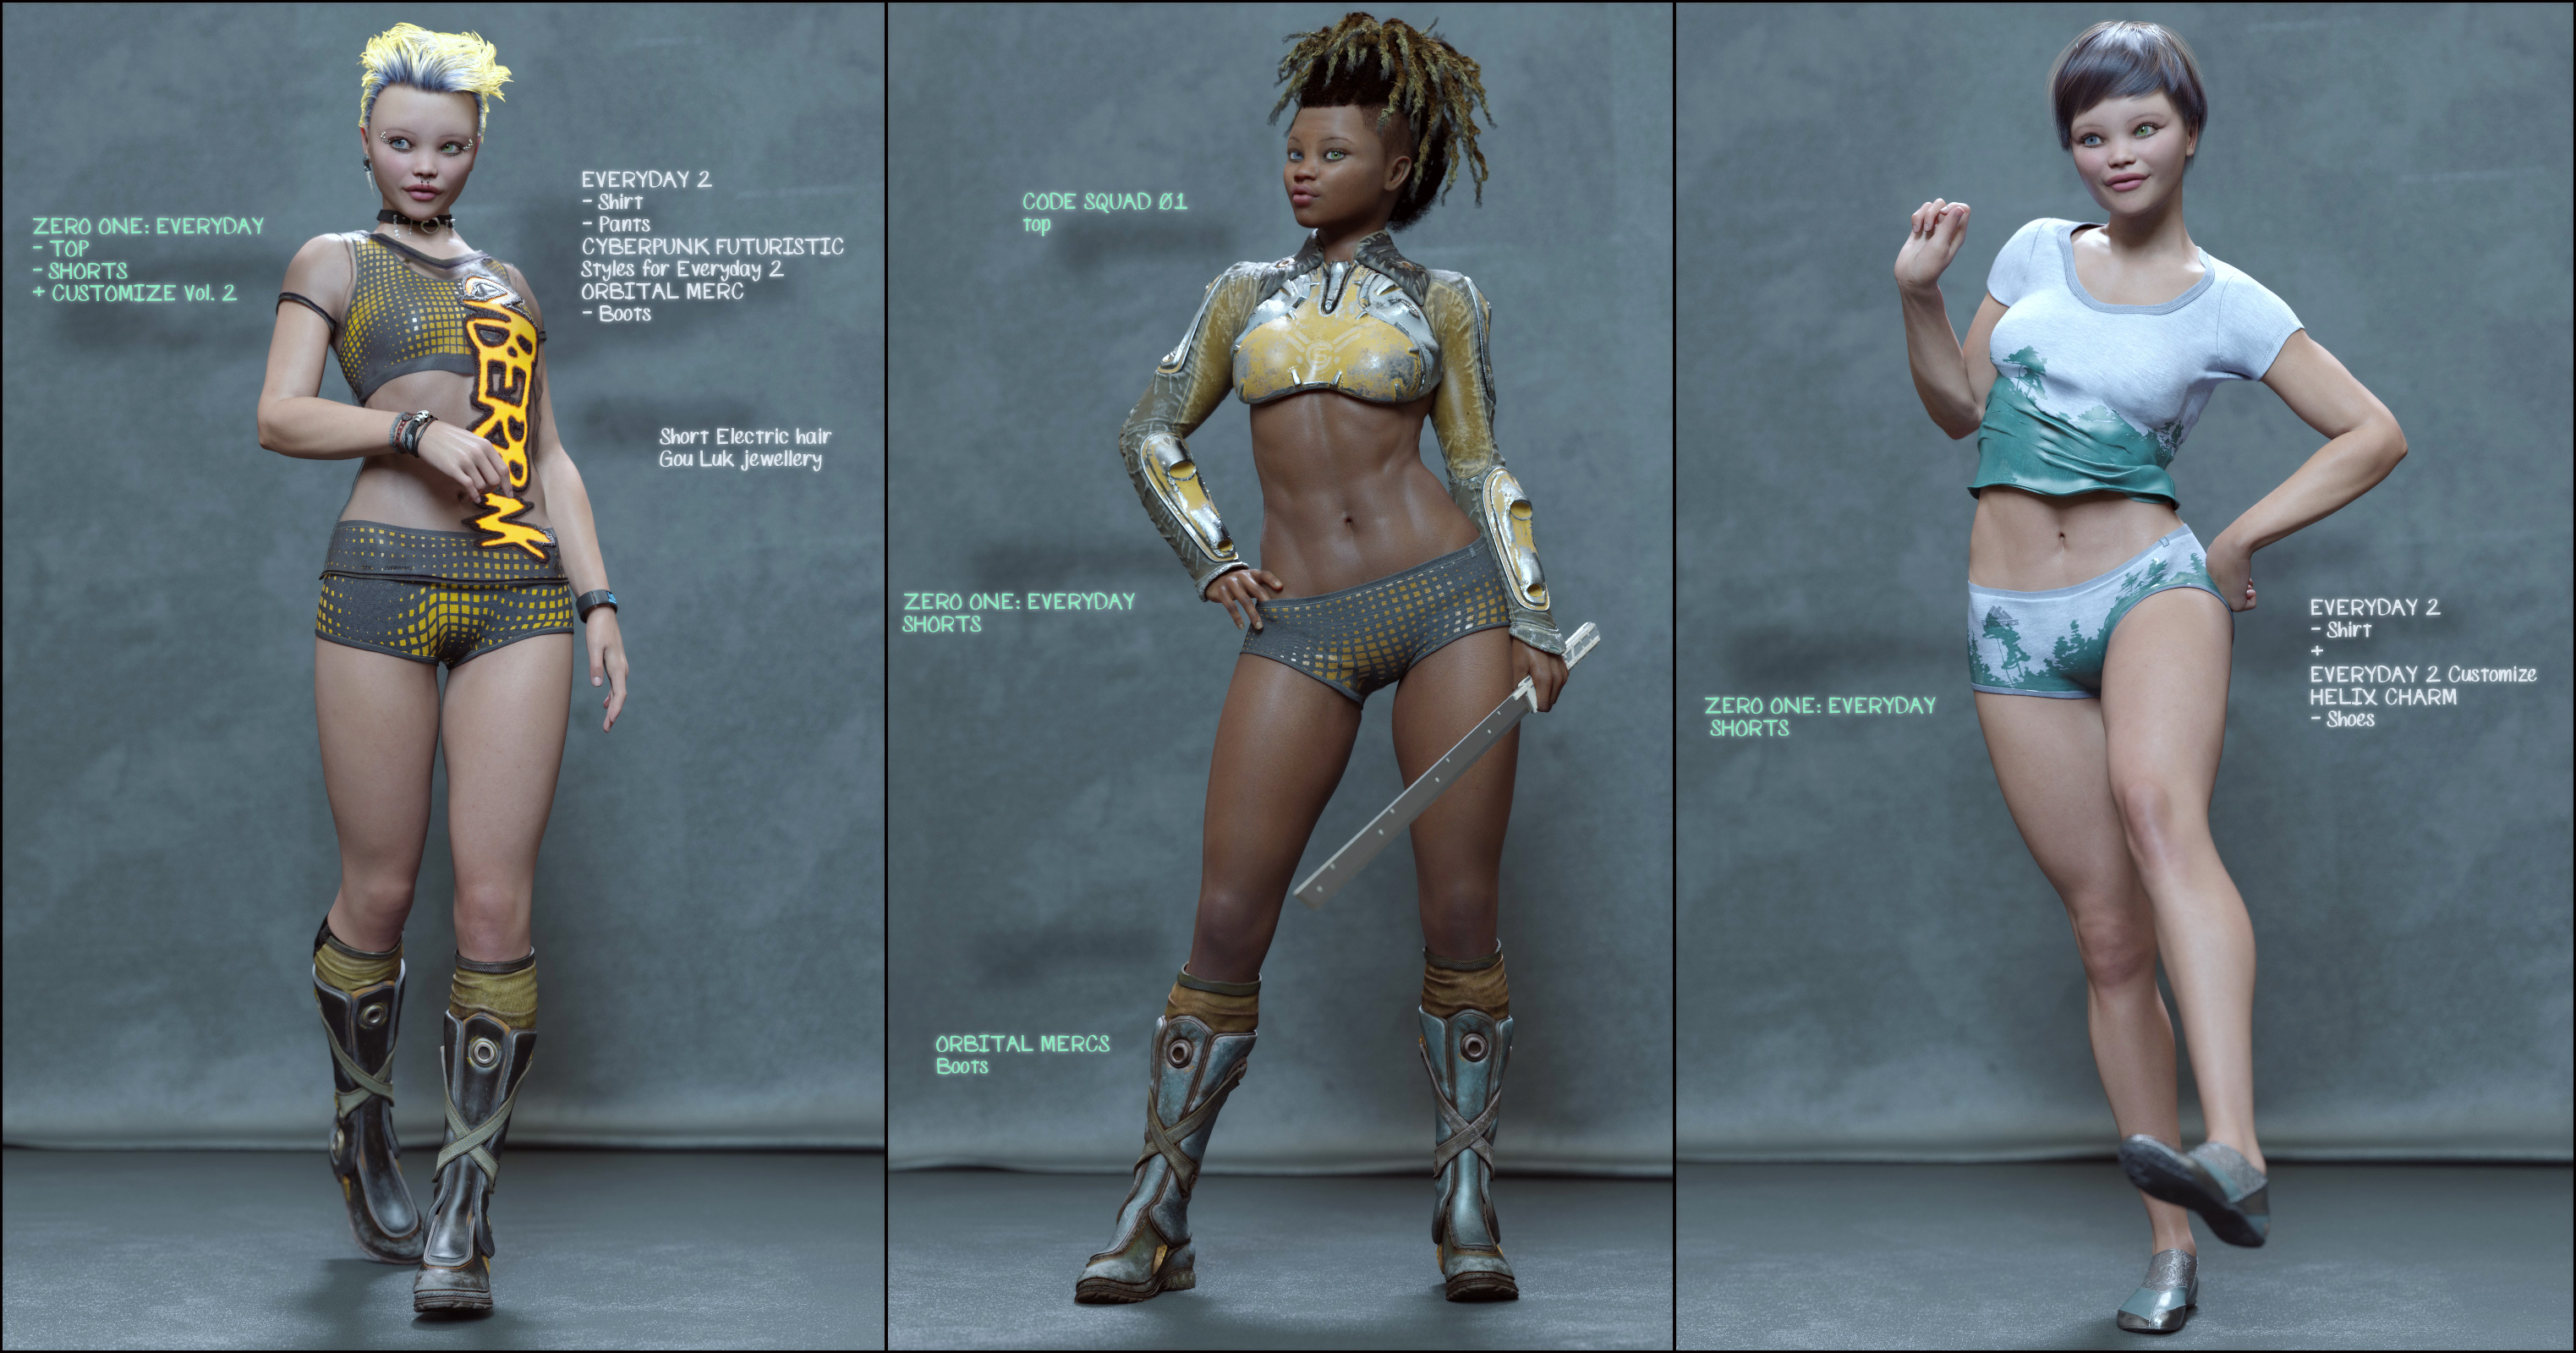 Customize Vol 2 for Zero One: Everyday by: Aeon Soul, 3D Models by Daz 3D